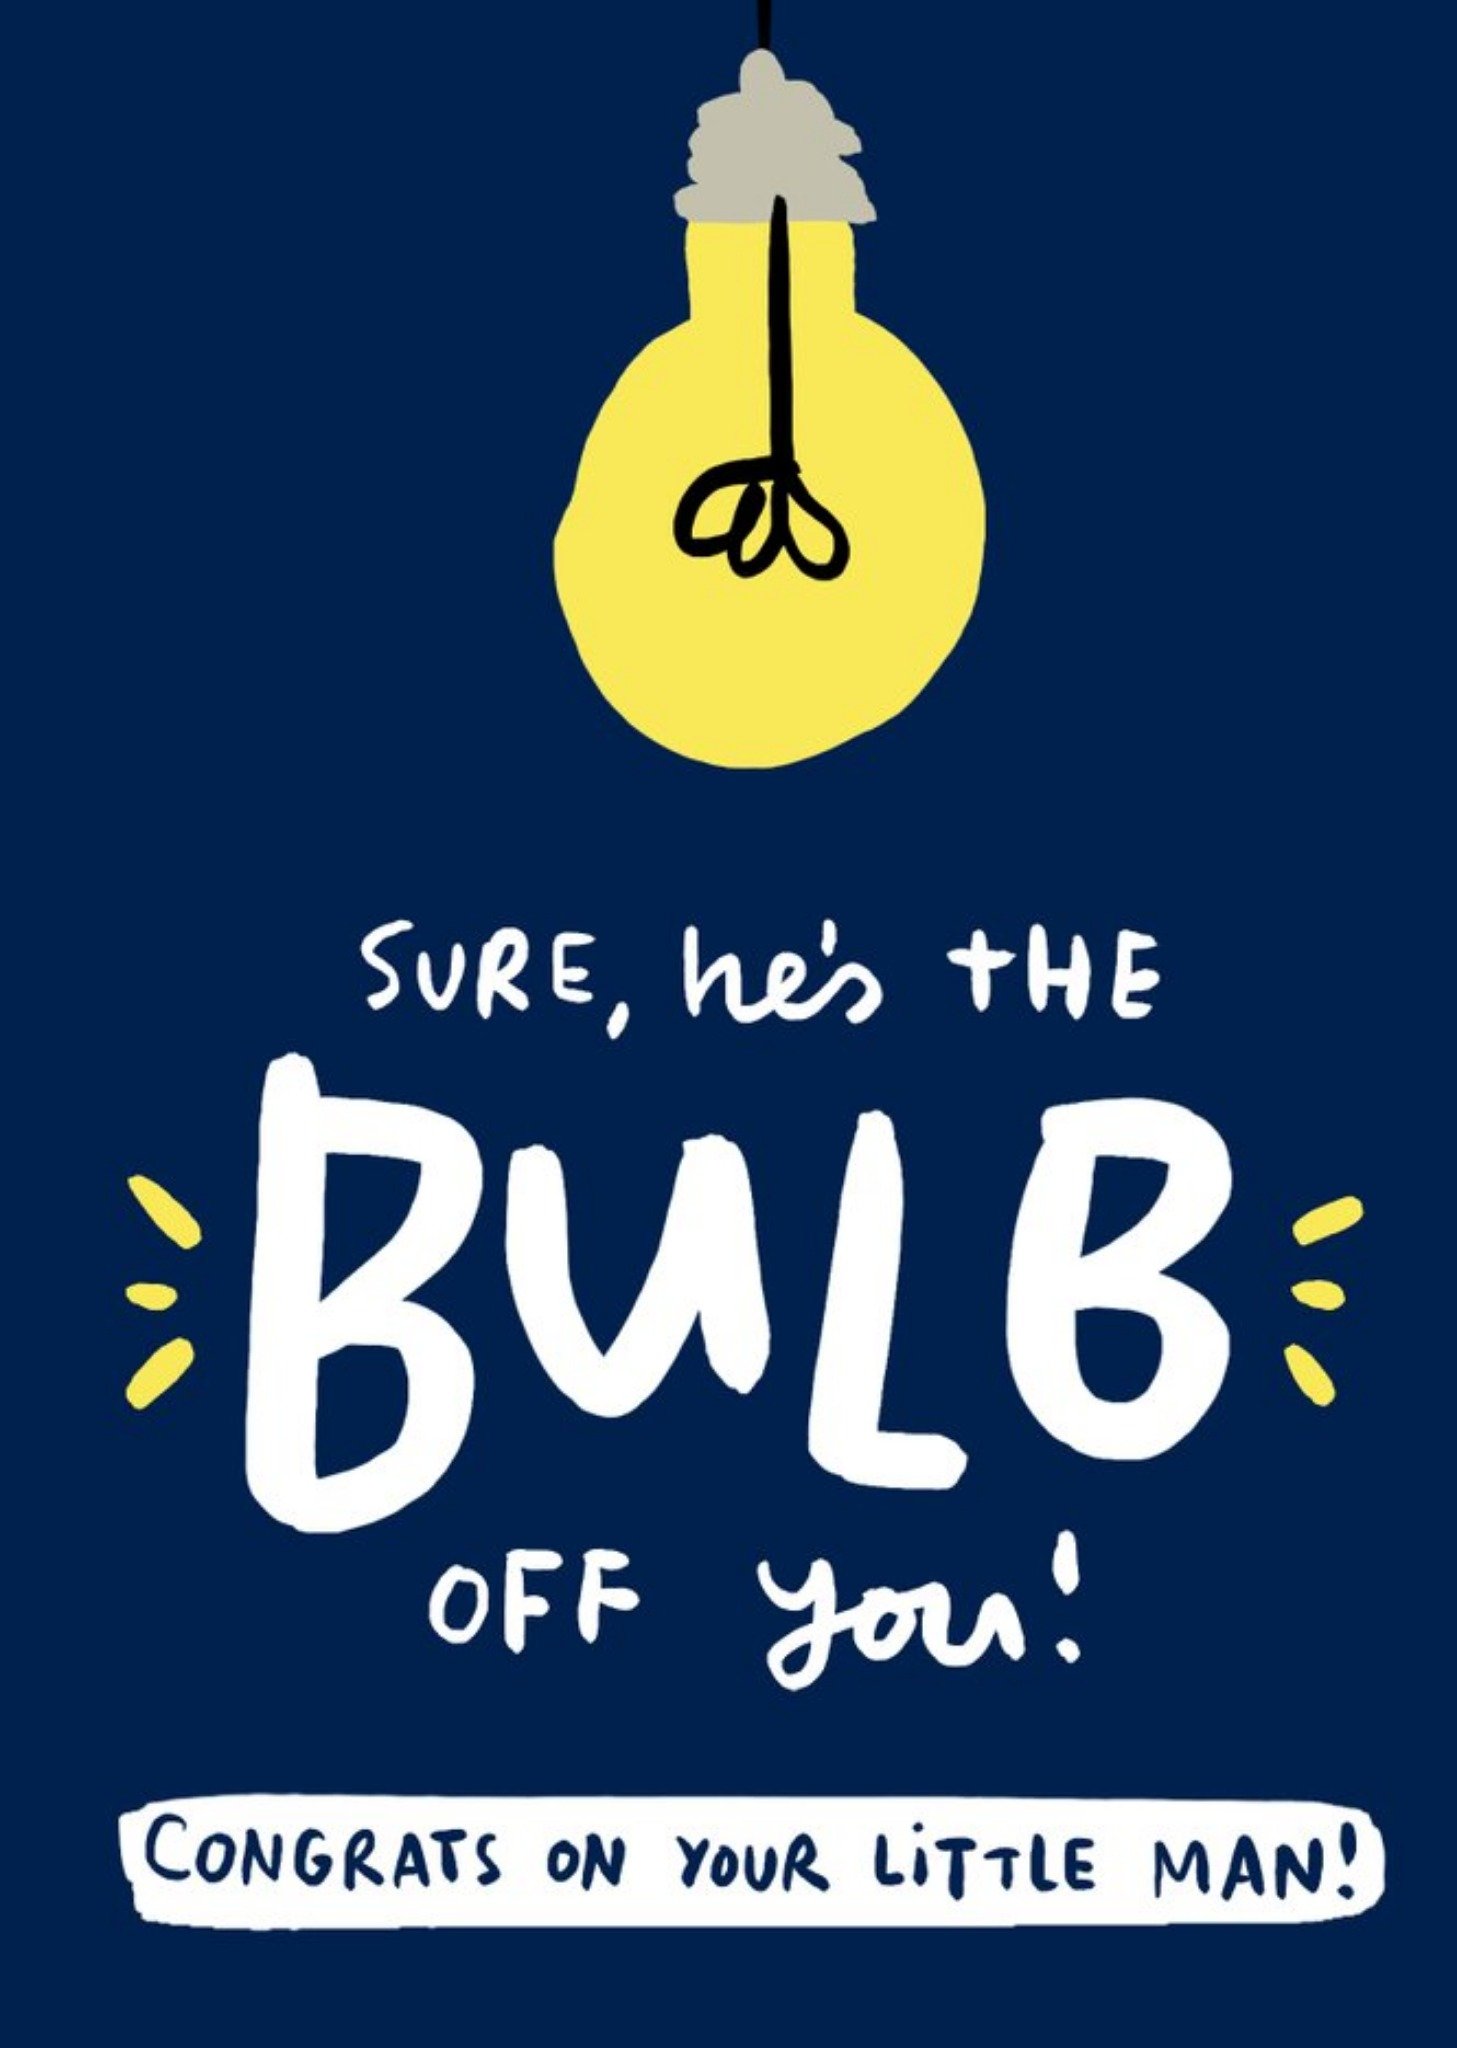 Moonpig Illustrated Bulb He's The Bulb You Congrats New Baby Card, Large